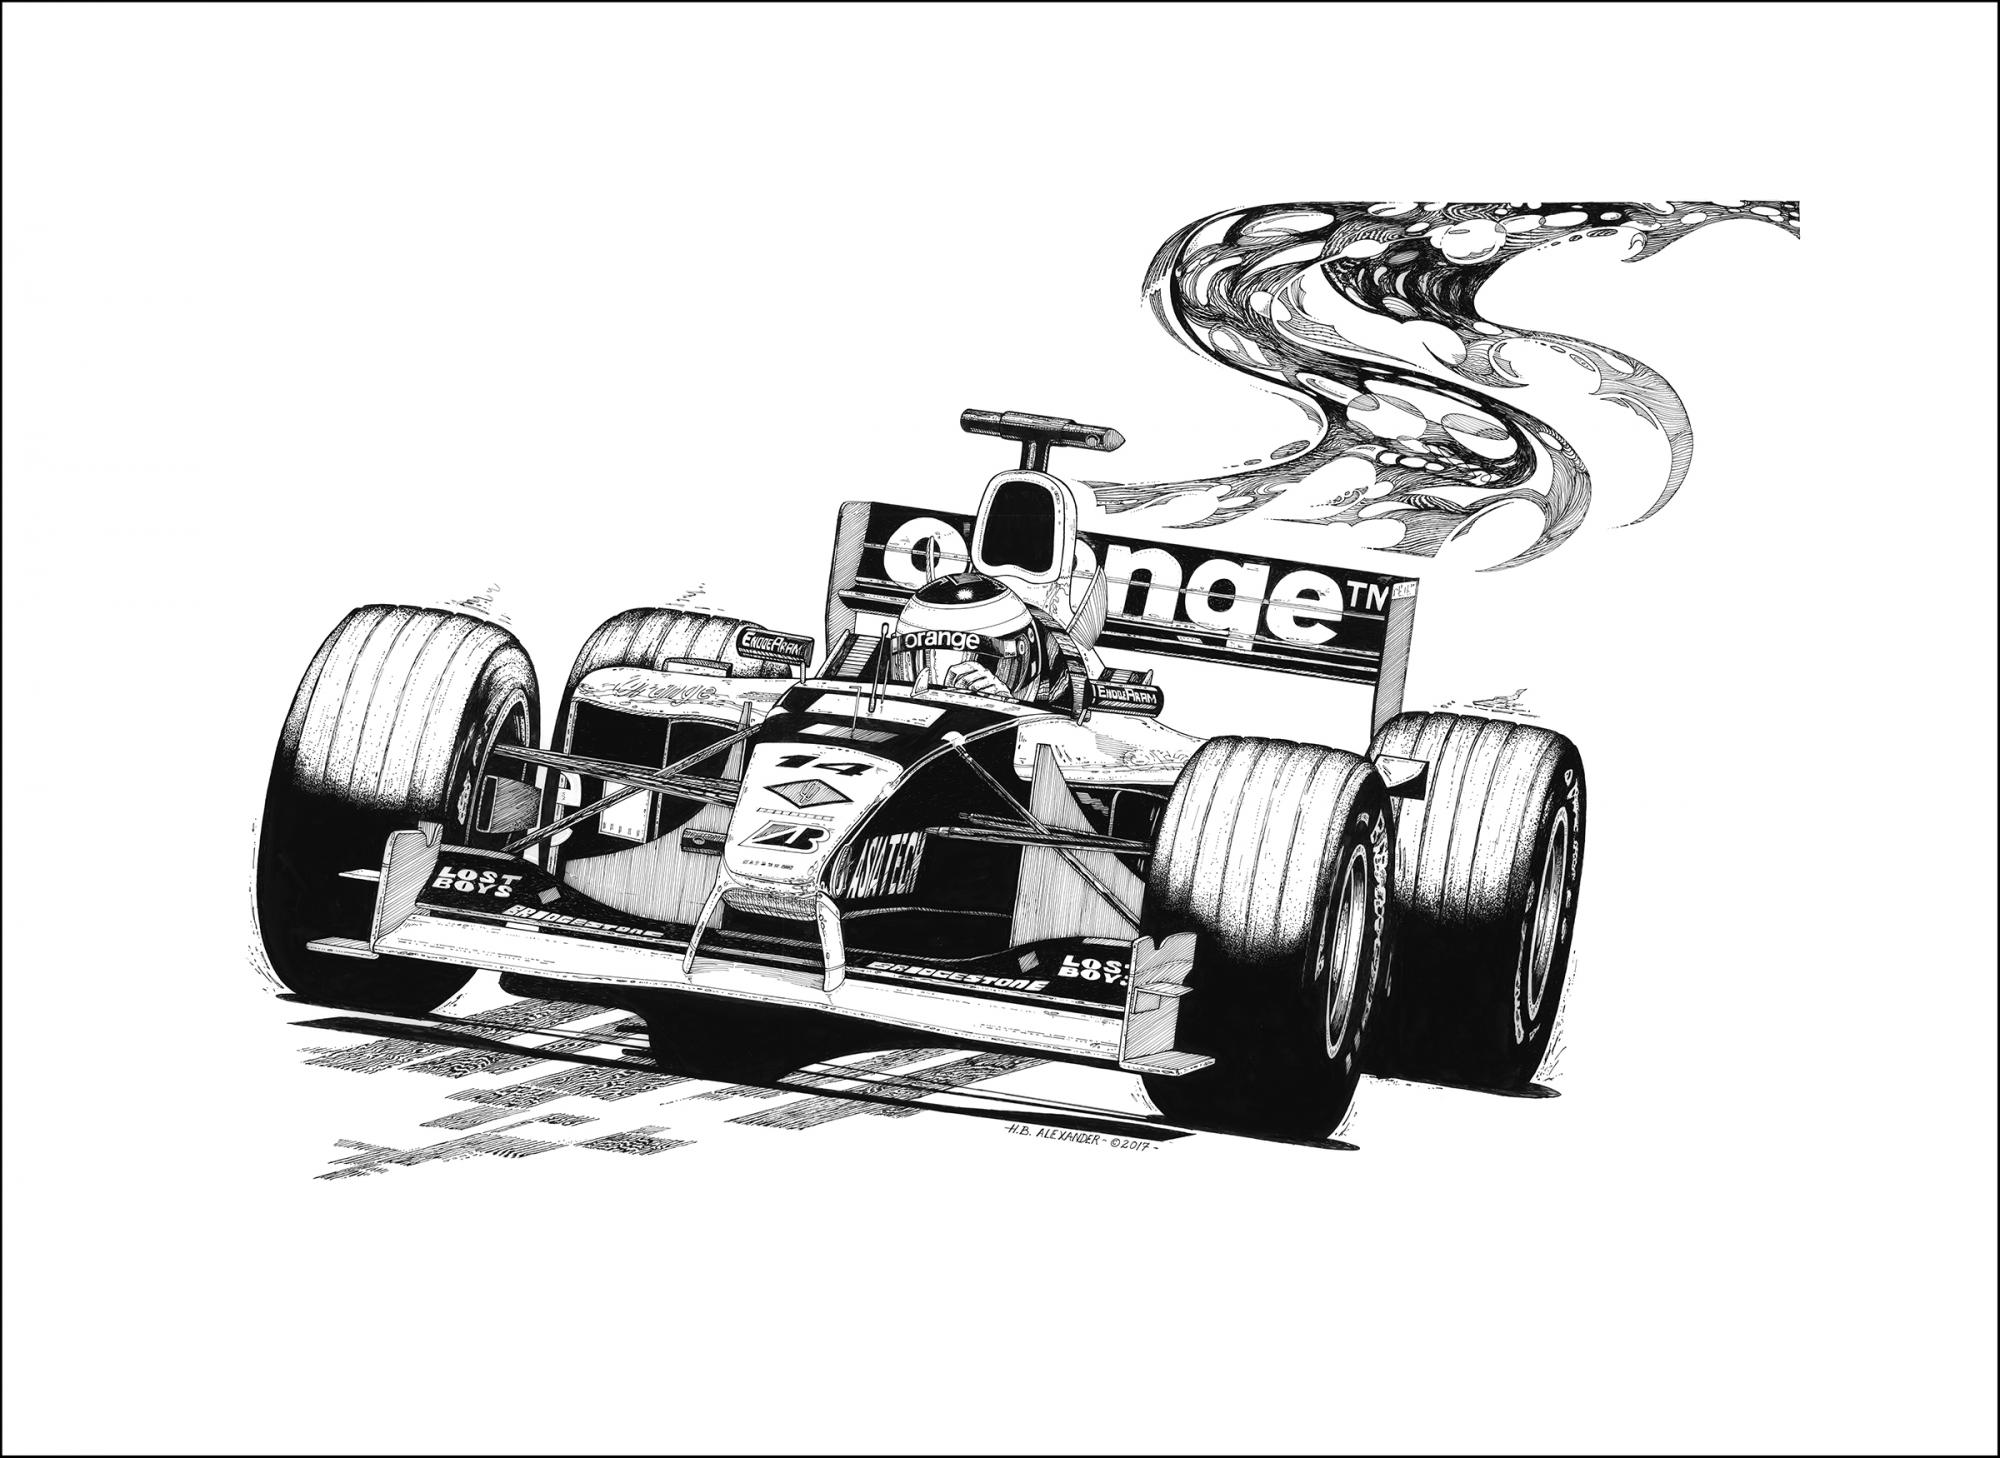 Pen and Ink drawing of racer by Hugh B. Alexander